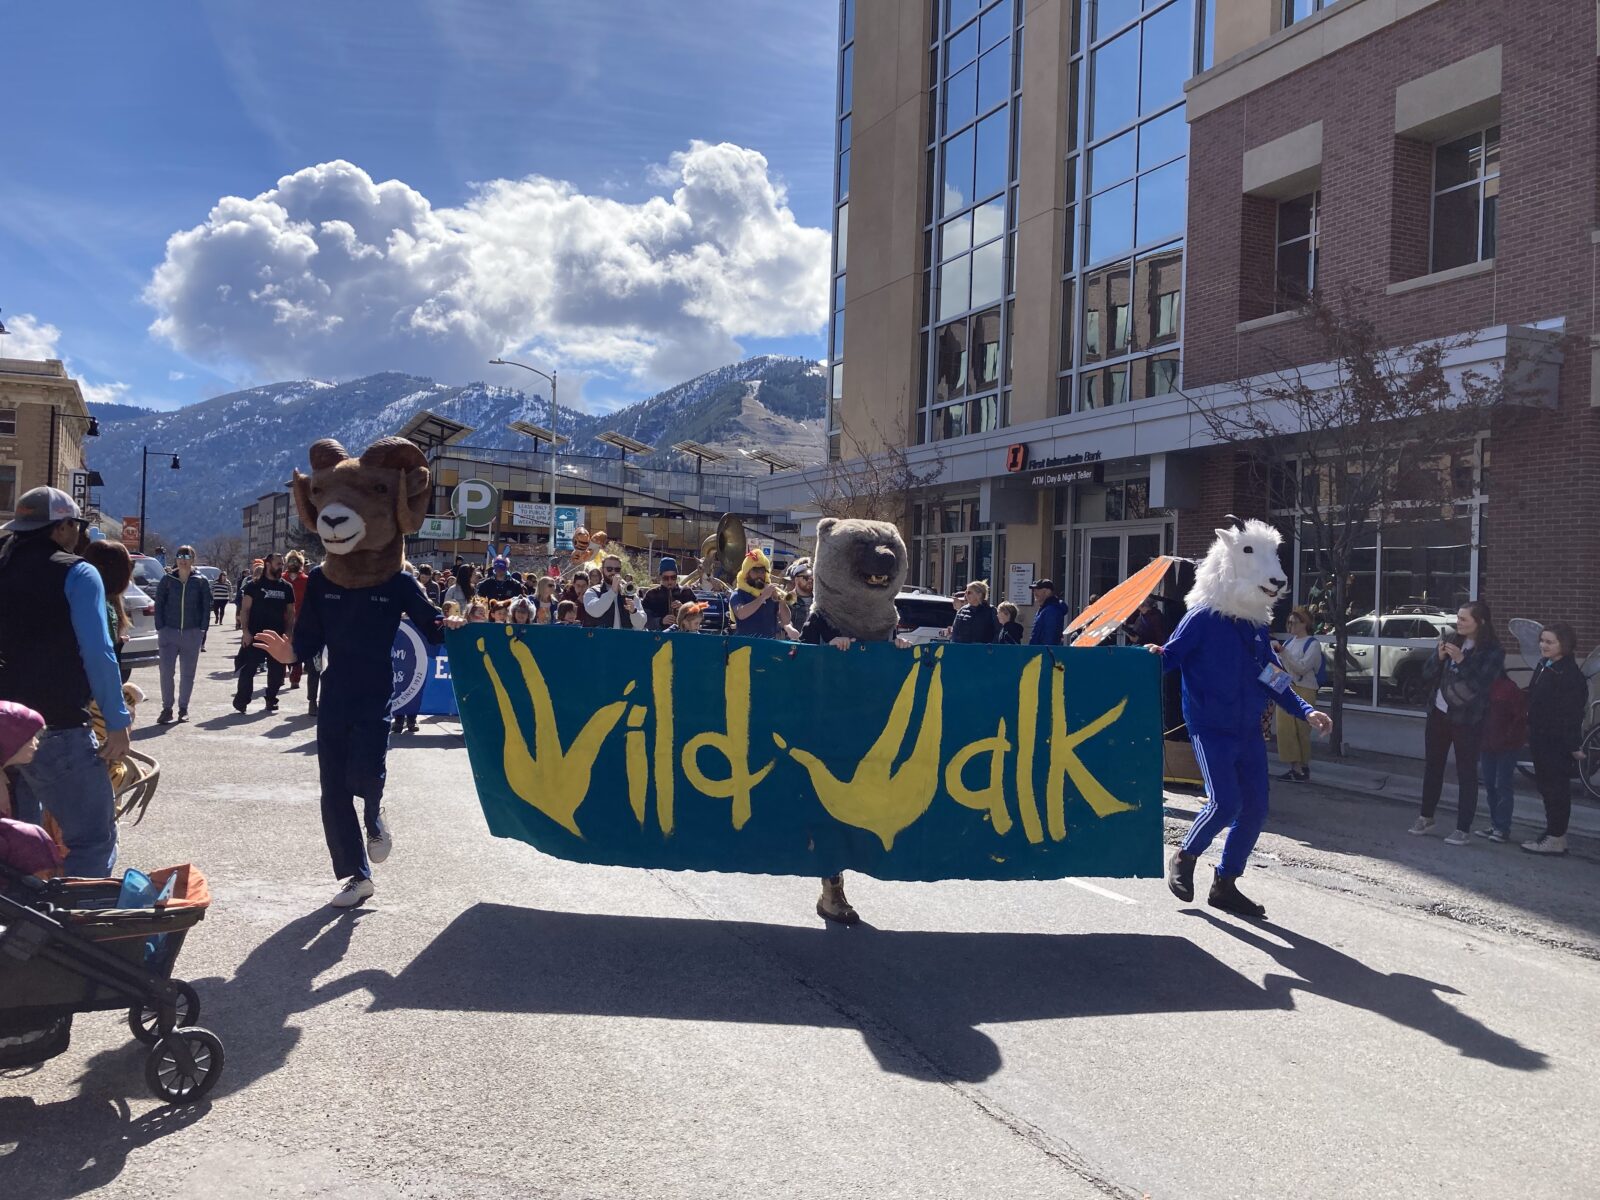 People in costumes and march-goers walk down a street holding a large banner reading, "Wild Walk".